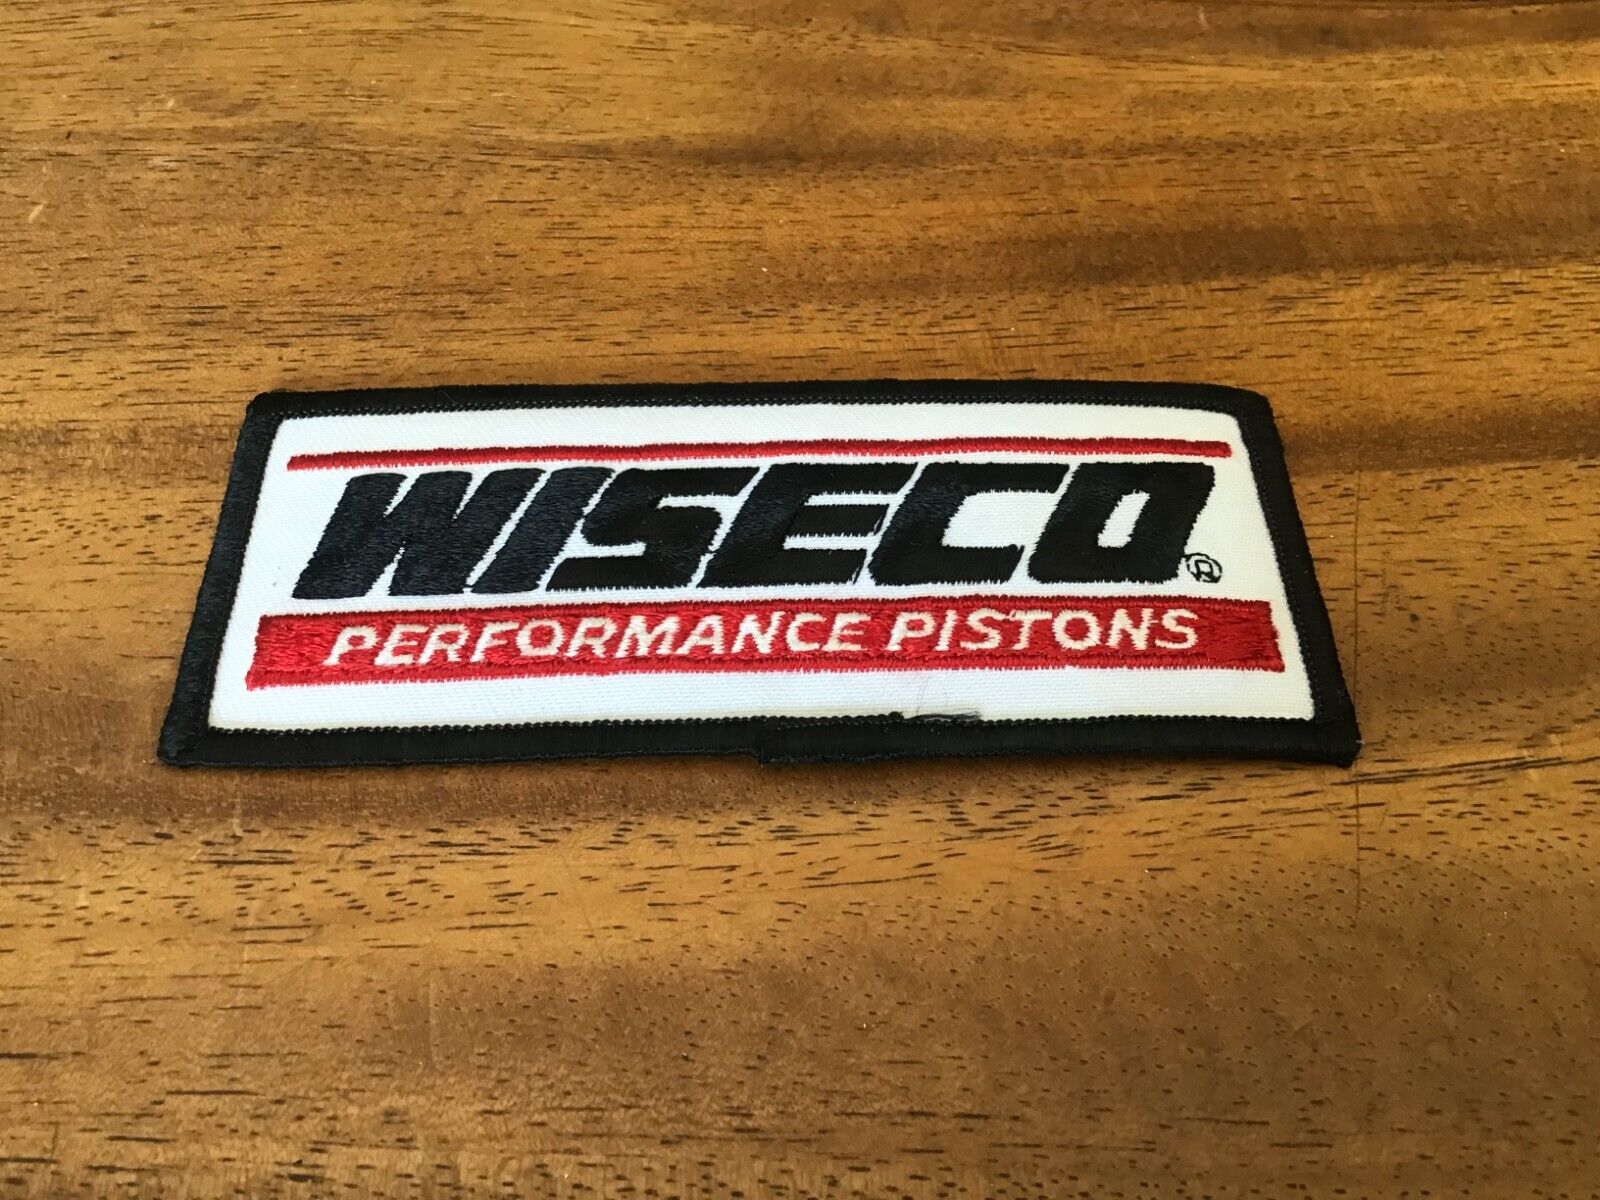 WISECO PERFORMANCE PISTONS EMBROIDERED PATCH AUTOMOTIVE - Canadian Seller